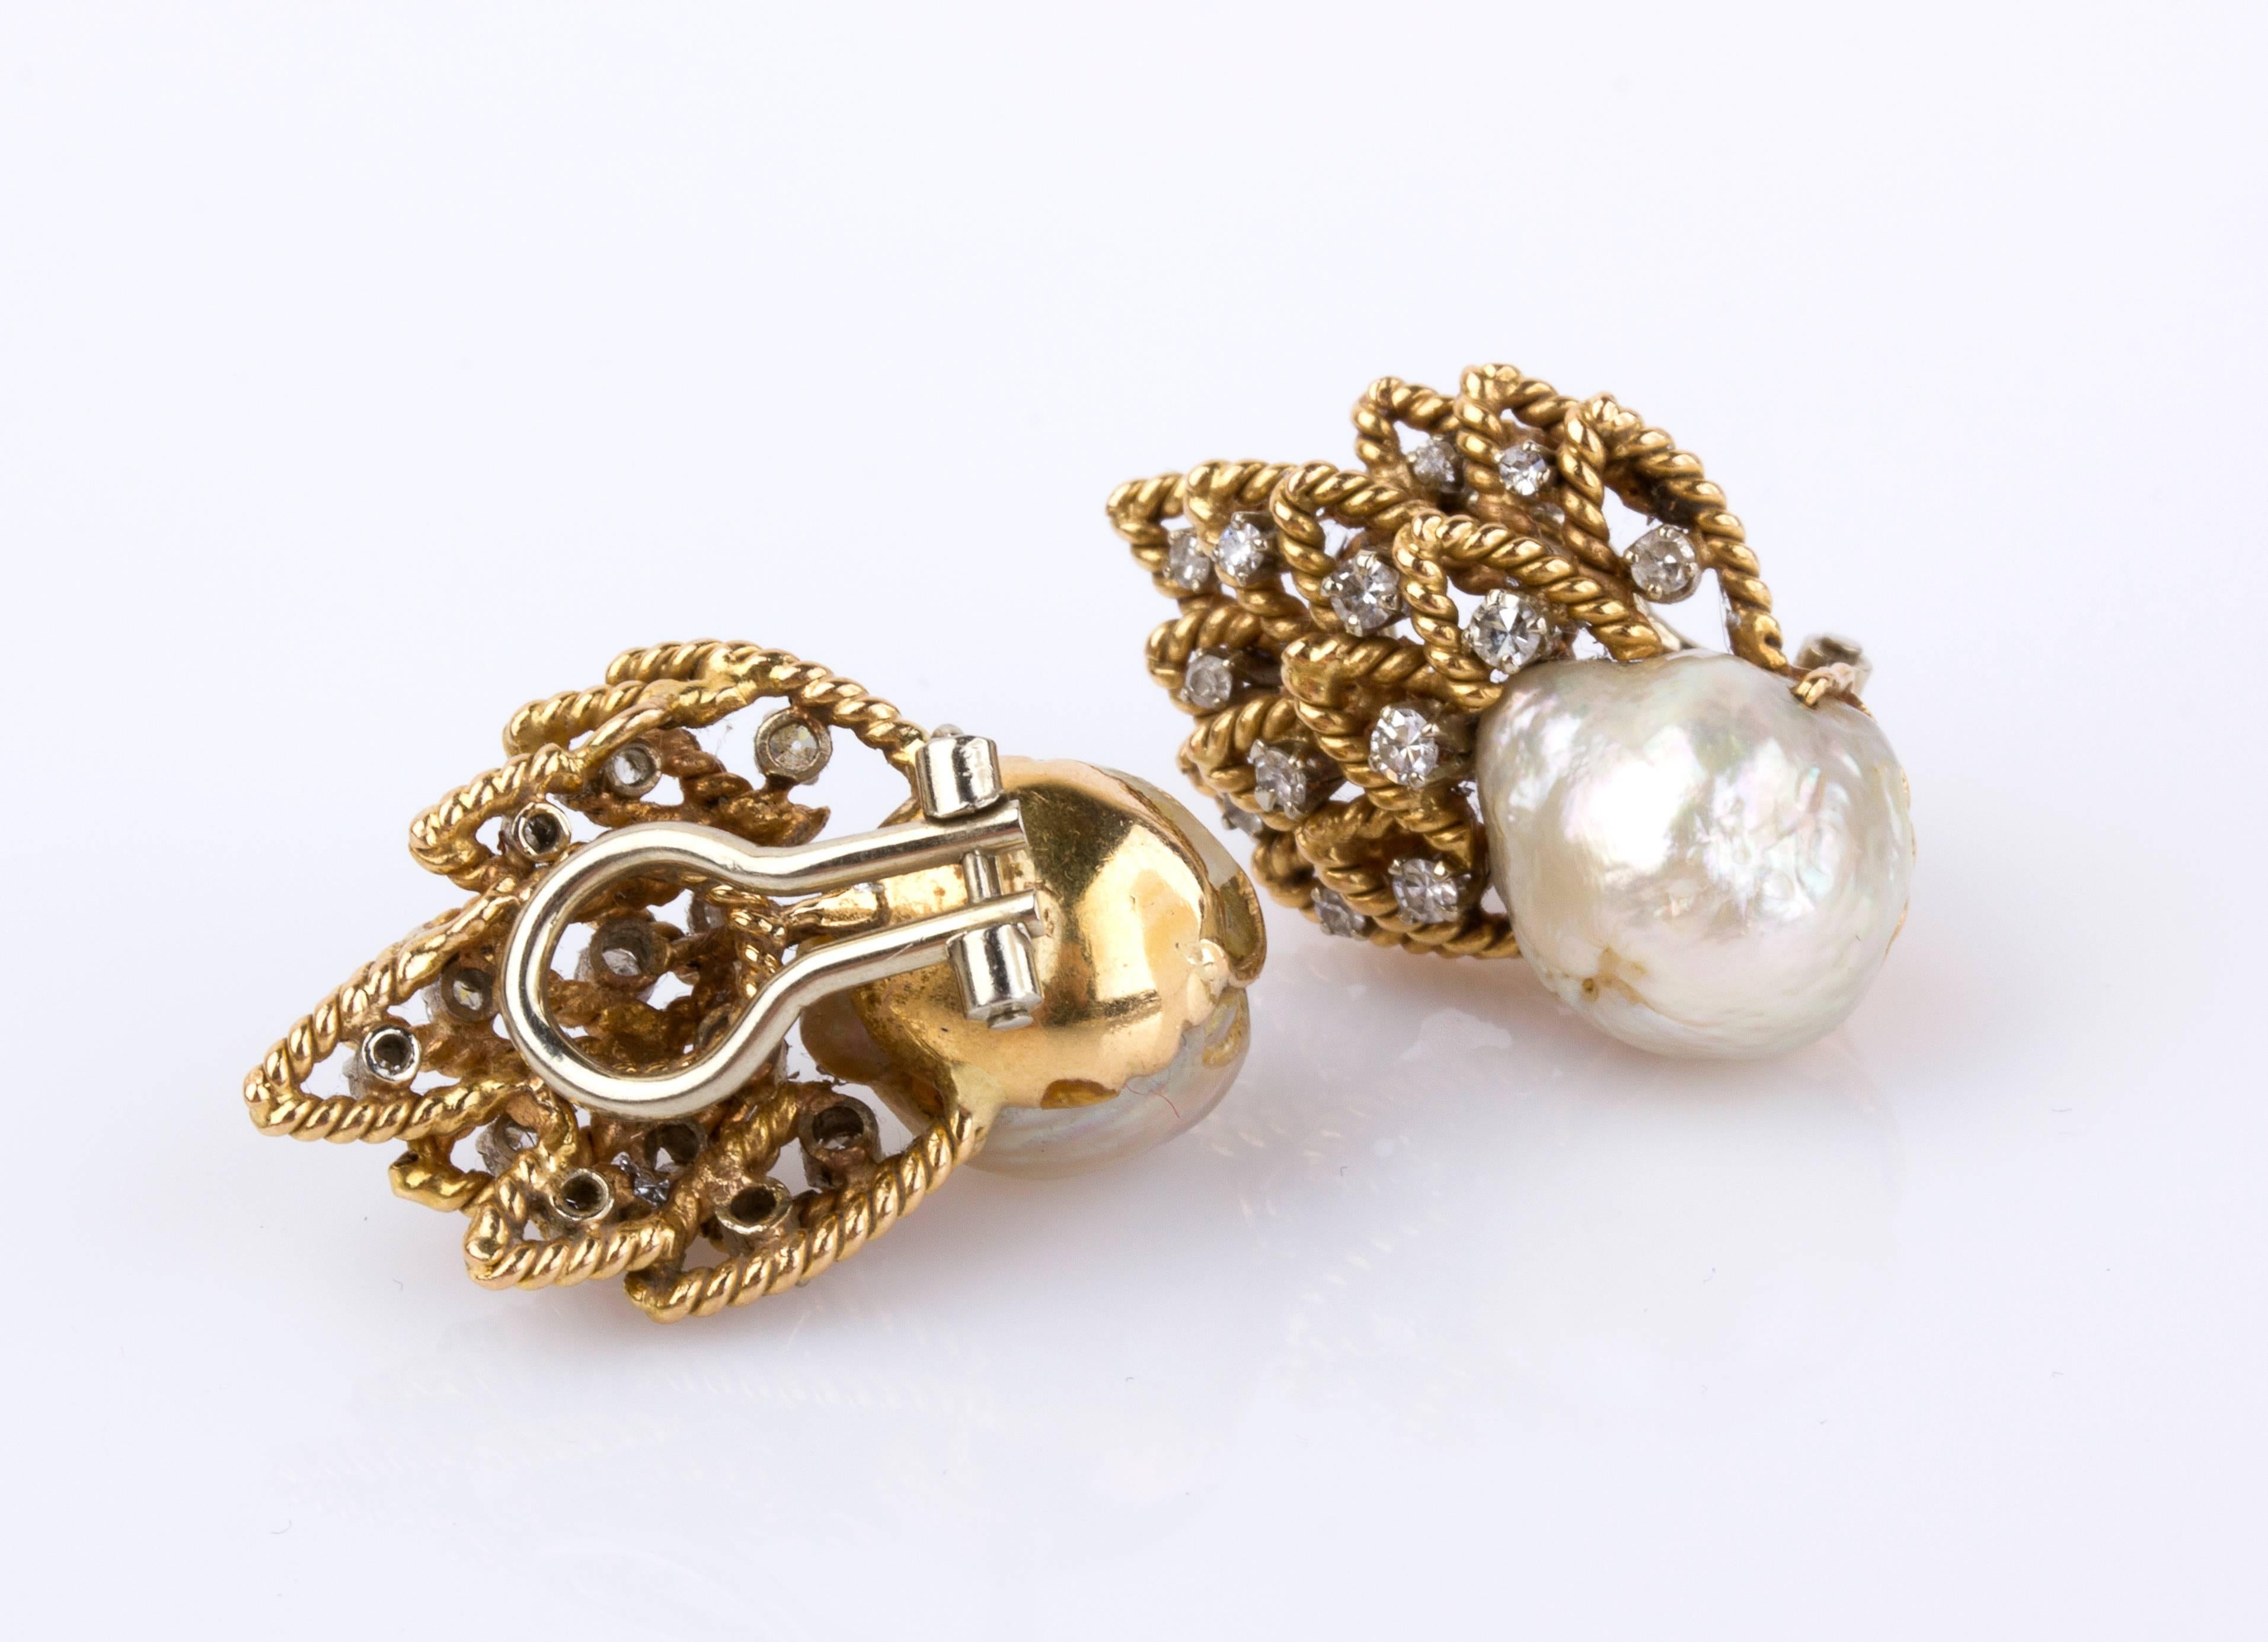 Baroque pearl surmounted by floral motif decorated with huit huit diamond weighing 1.20 ct. 